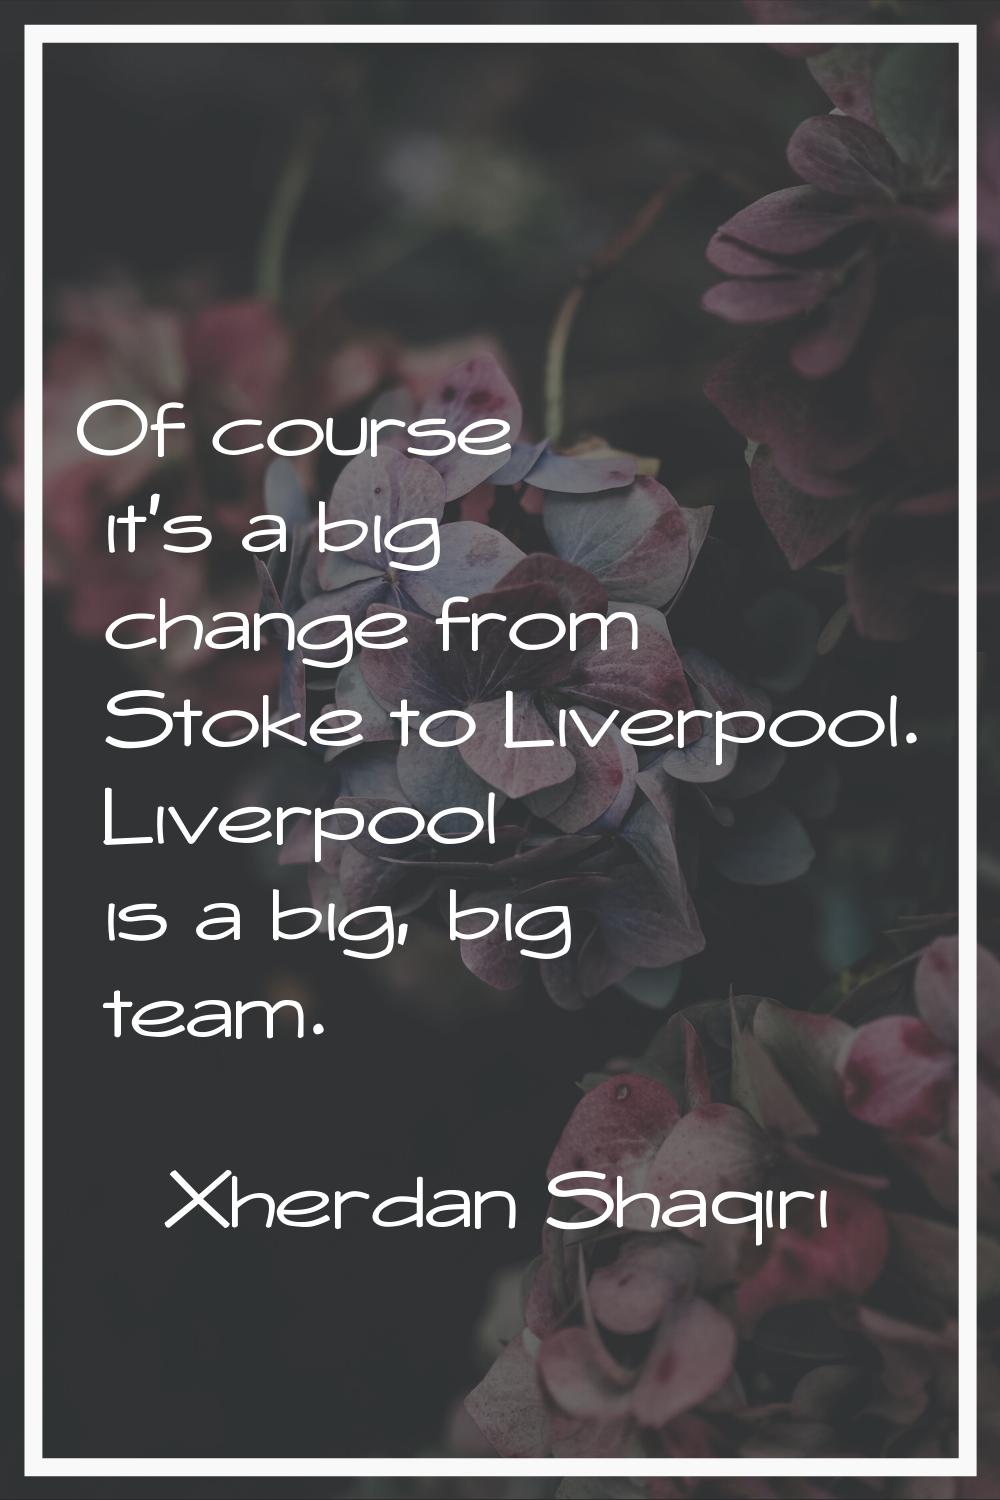 Of course it's a big change from Stoke to Liverpool. Liverpool is a big, big team.